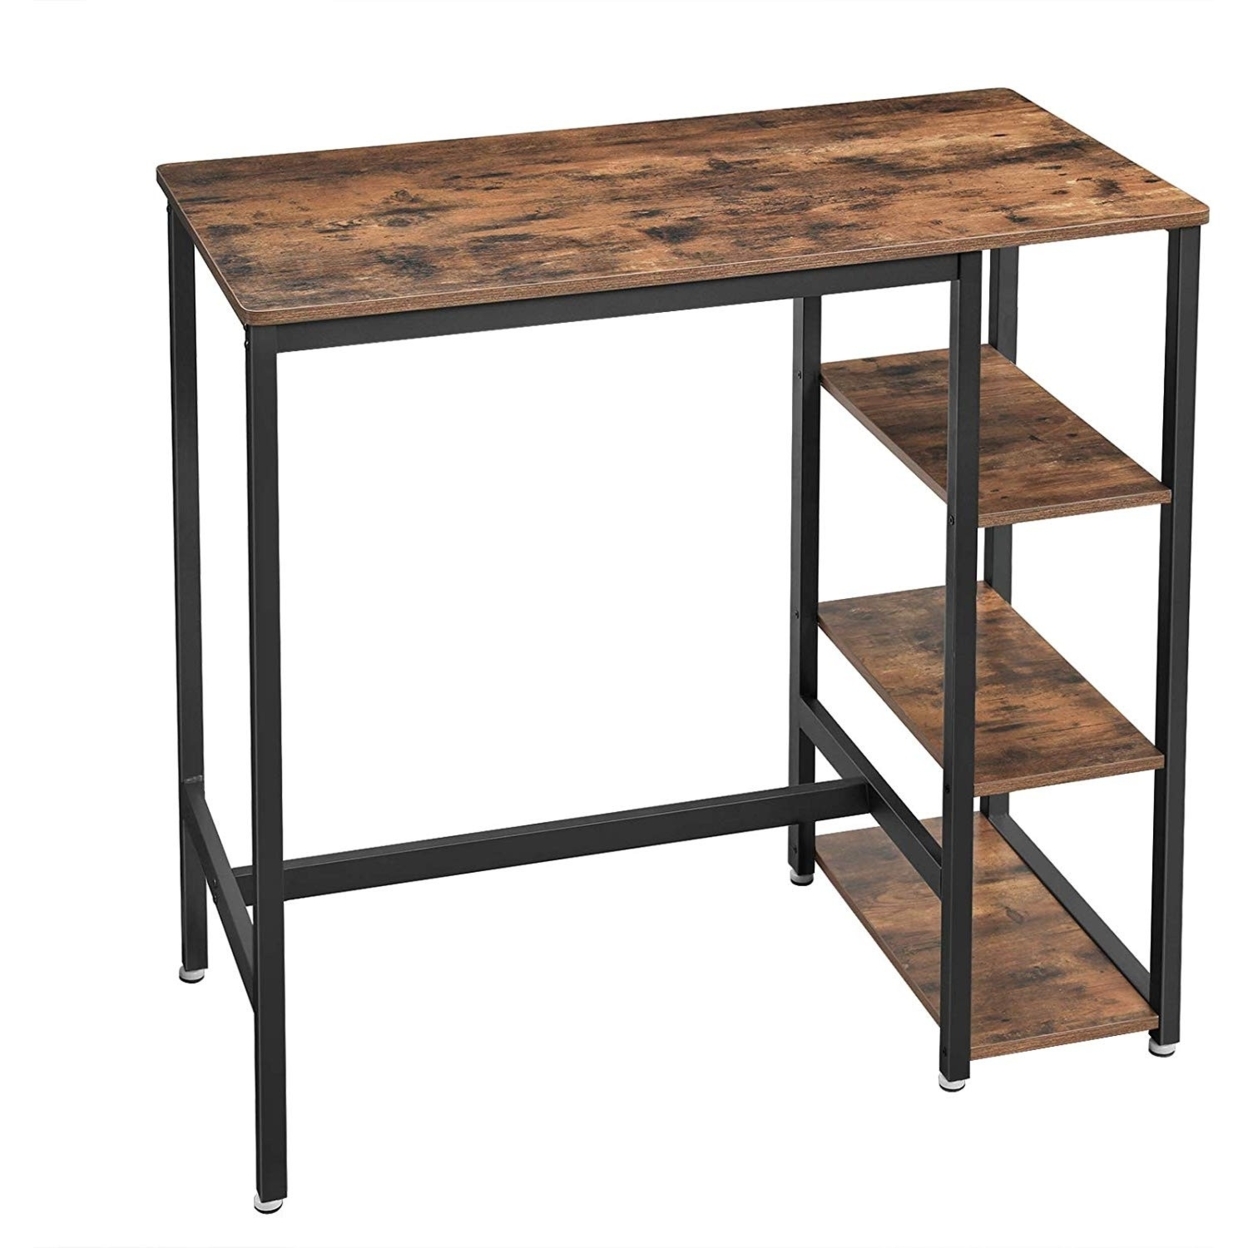 Wood And Metal Frame Bar Counter With 3 Shelves, Rustic Brown And Black- Saltoro Sherpi